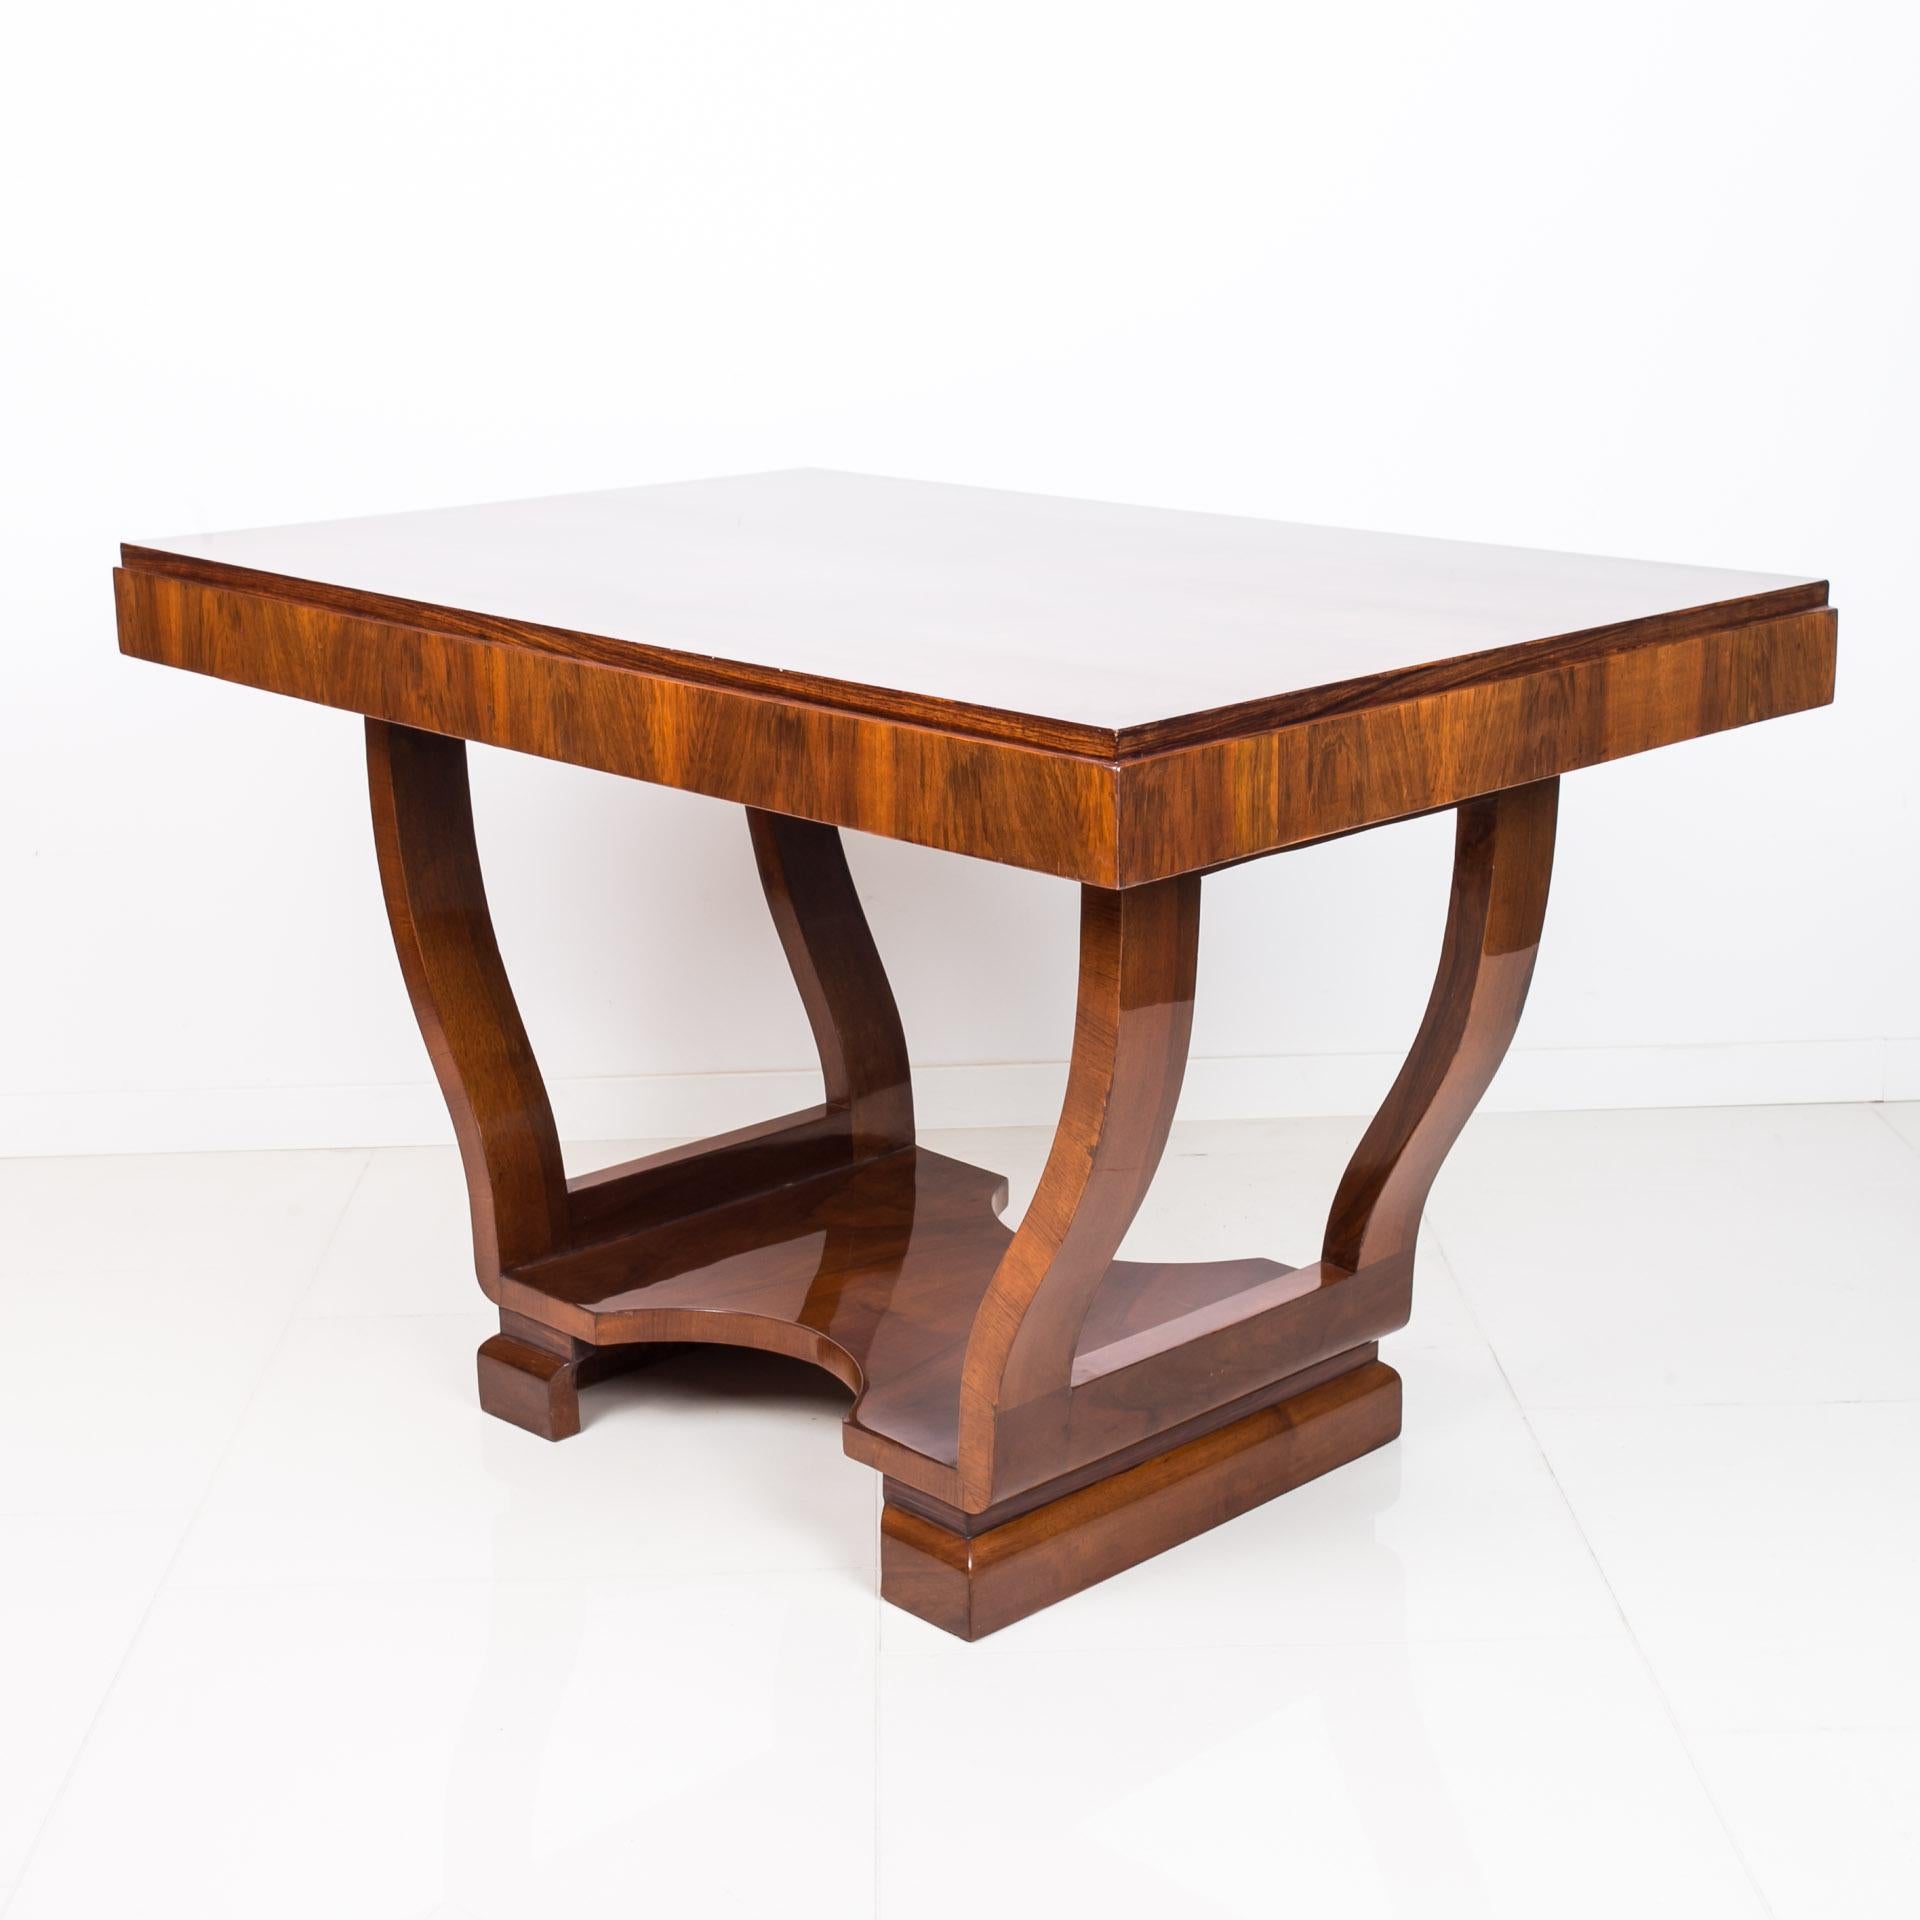 This beautiful Art Deco table was made approximately in 1930s in Czechia, Prague most probably. It features beautifully sculpted base and a top veneered with walnut, varnished to high gloss. The piece has been renovated - all surfaces have been